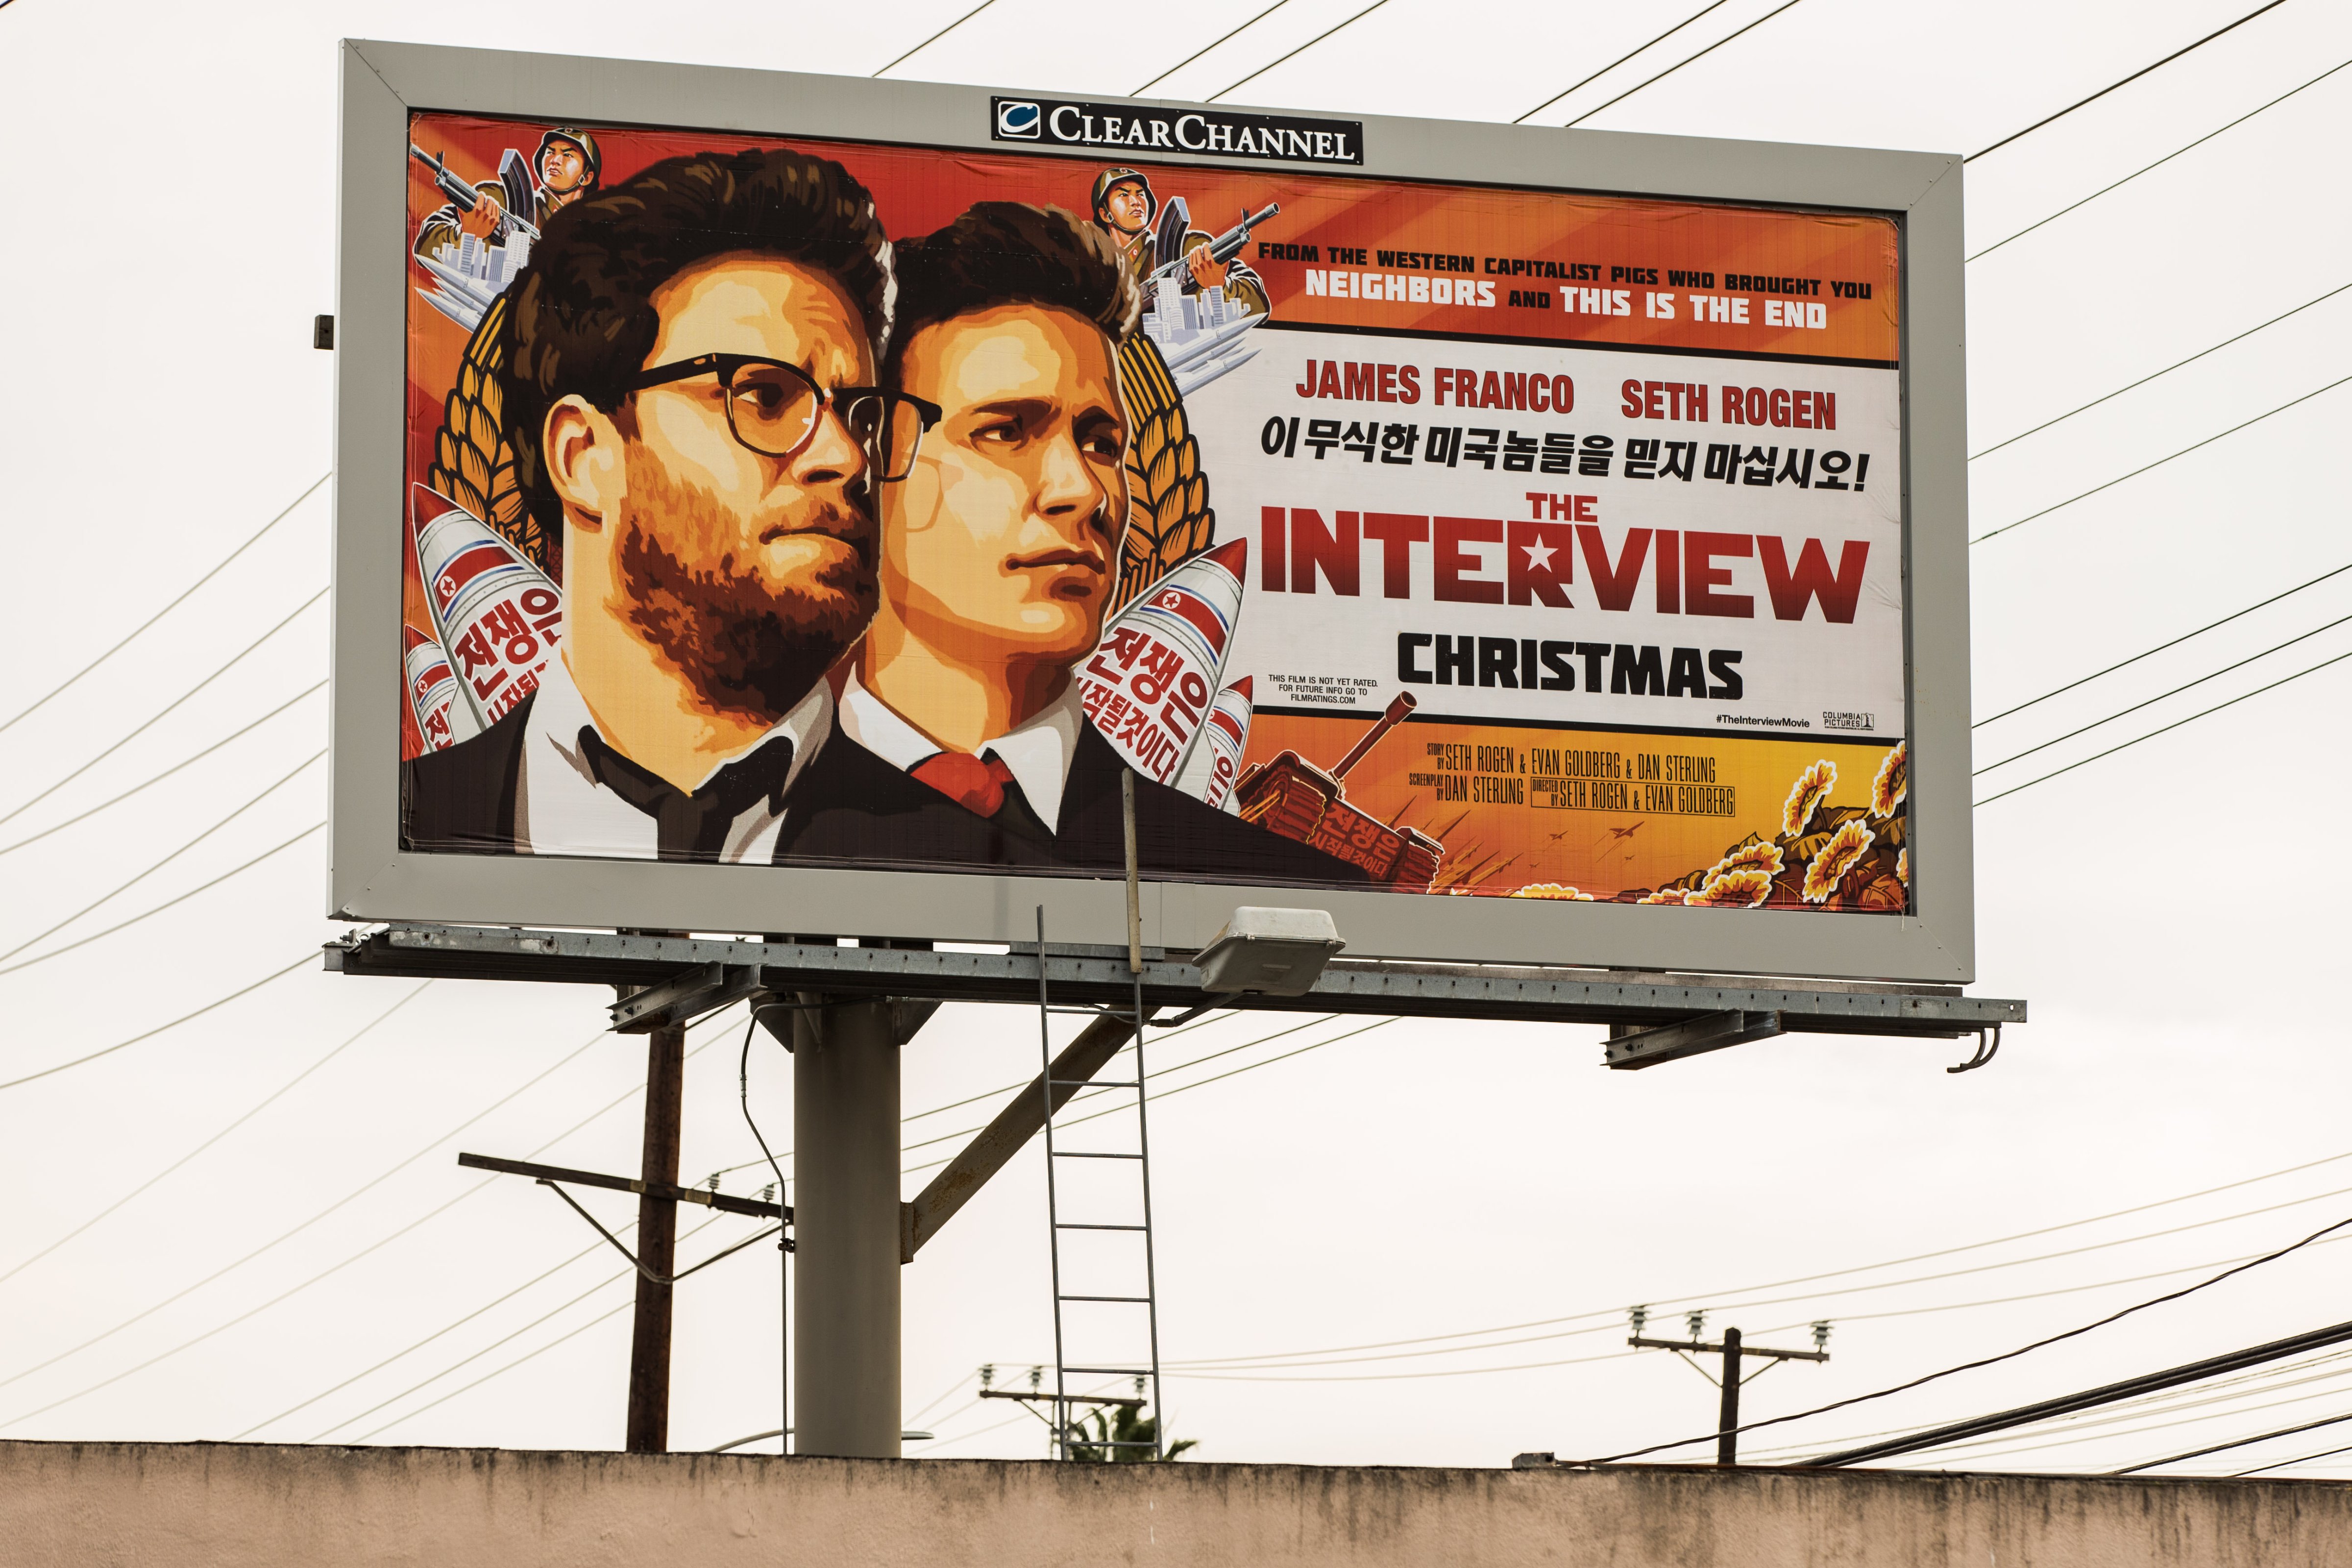 A billboard for the film 'The Interview' is displayed Dec. 19, 2014 in Venice, Calif. (Christopher Polk—Getty Images)